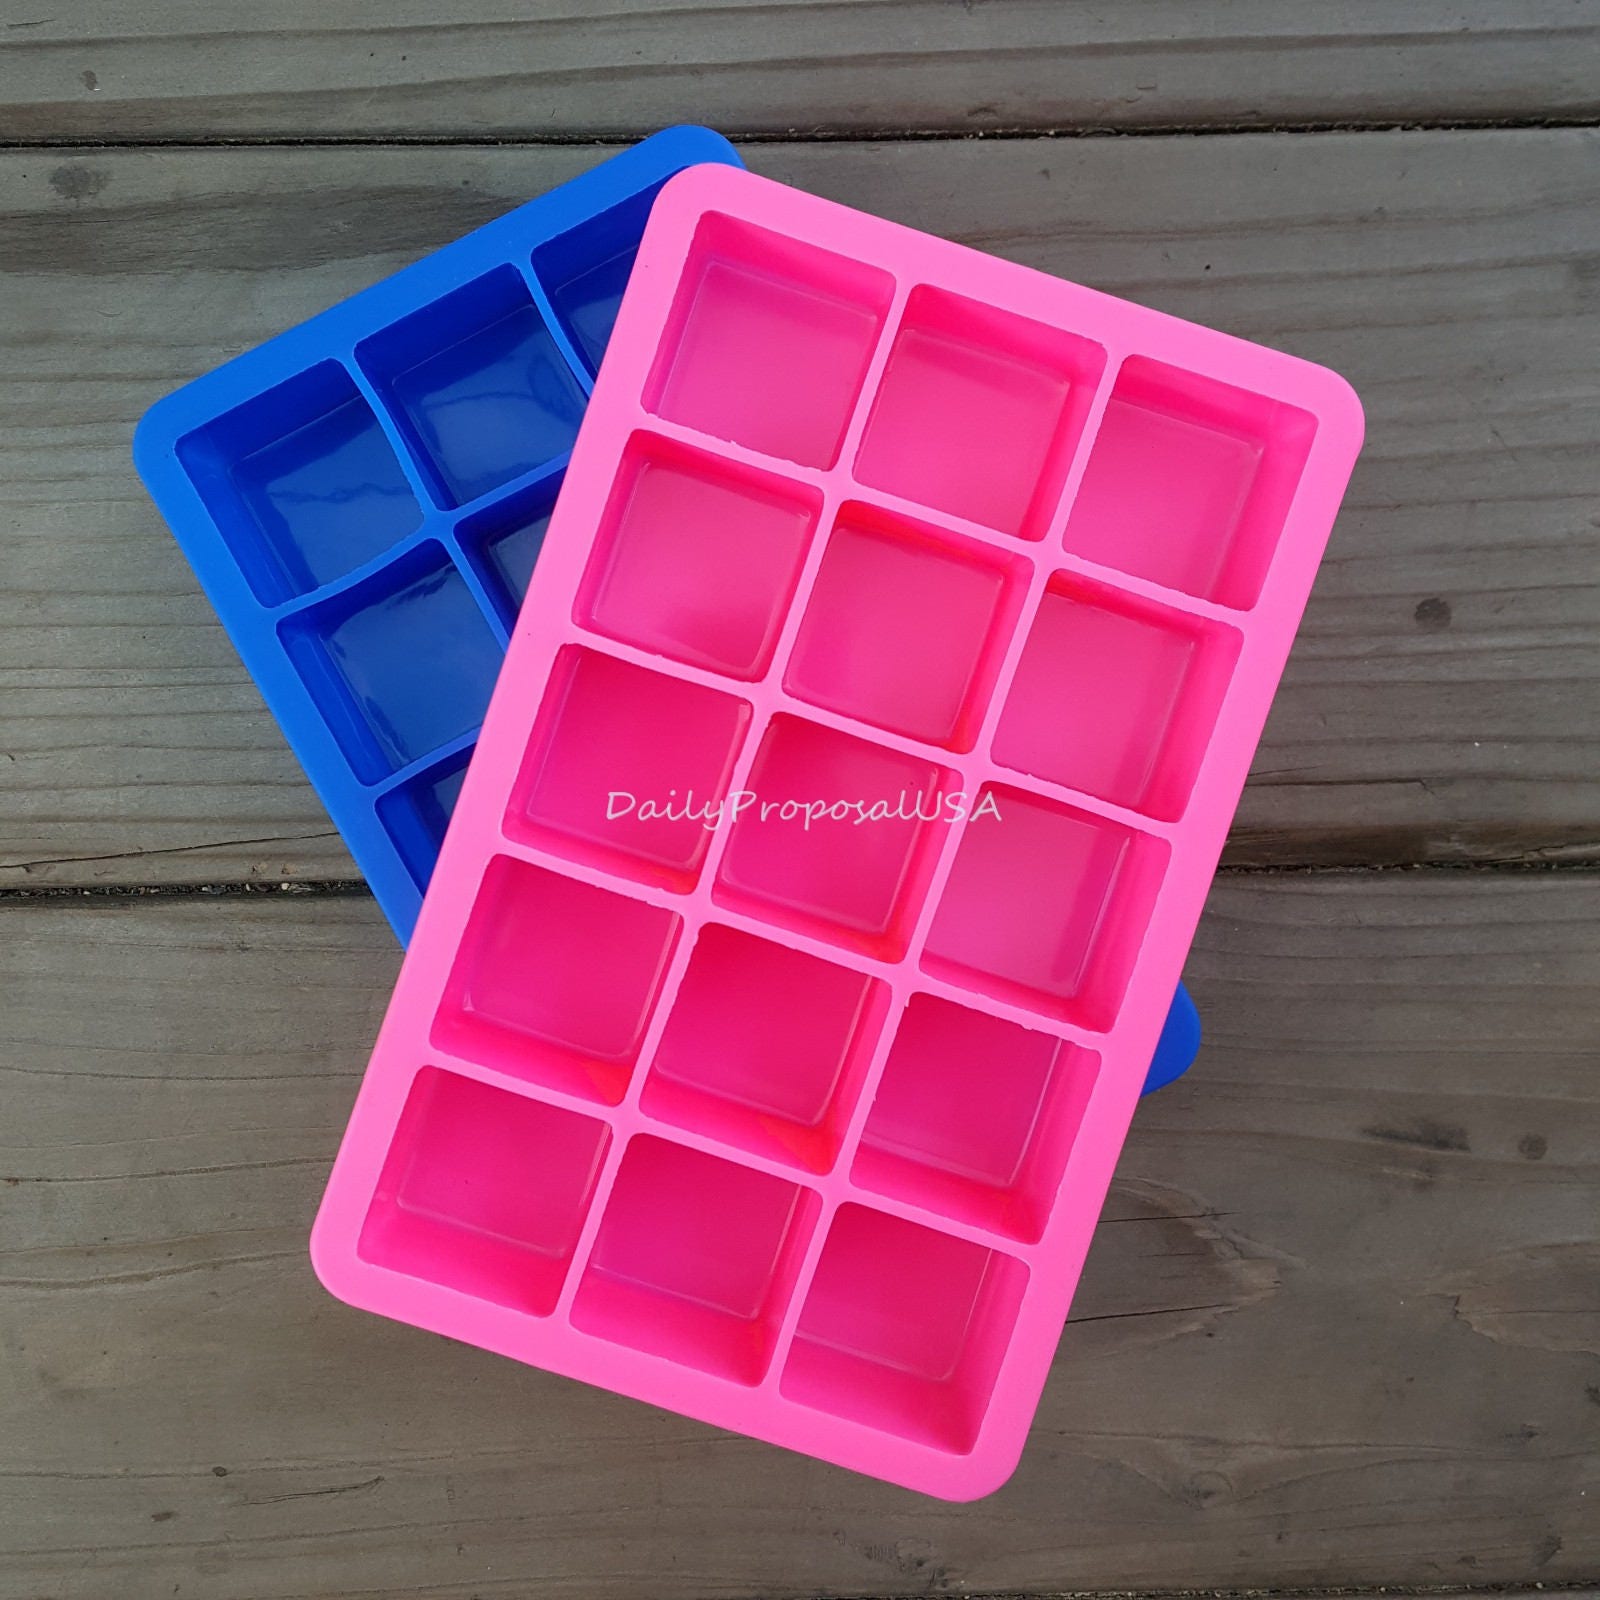 15/24 Grid Silicone Ice Cube Mold Reusable Ice Maker With Lids Food Grade  Ice Cube Square Tray Mold Bar Ice Blocks Maker Tools